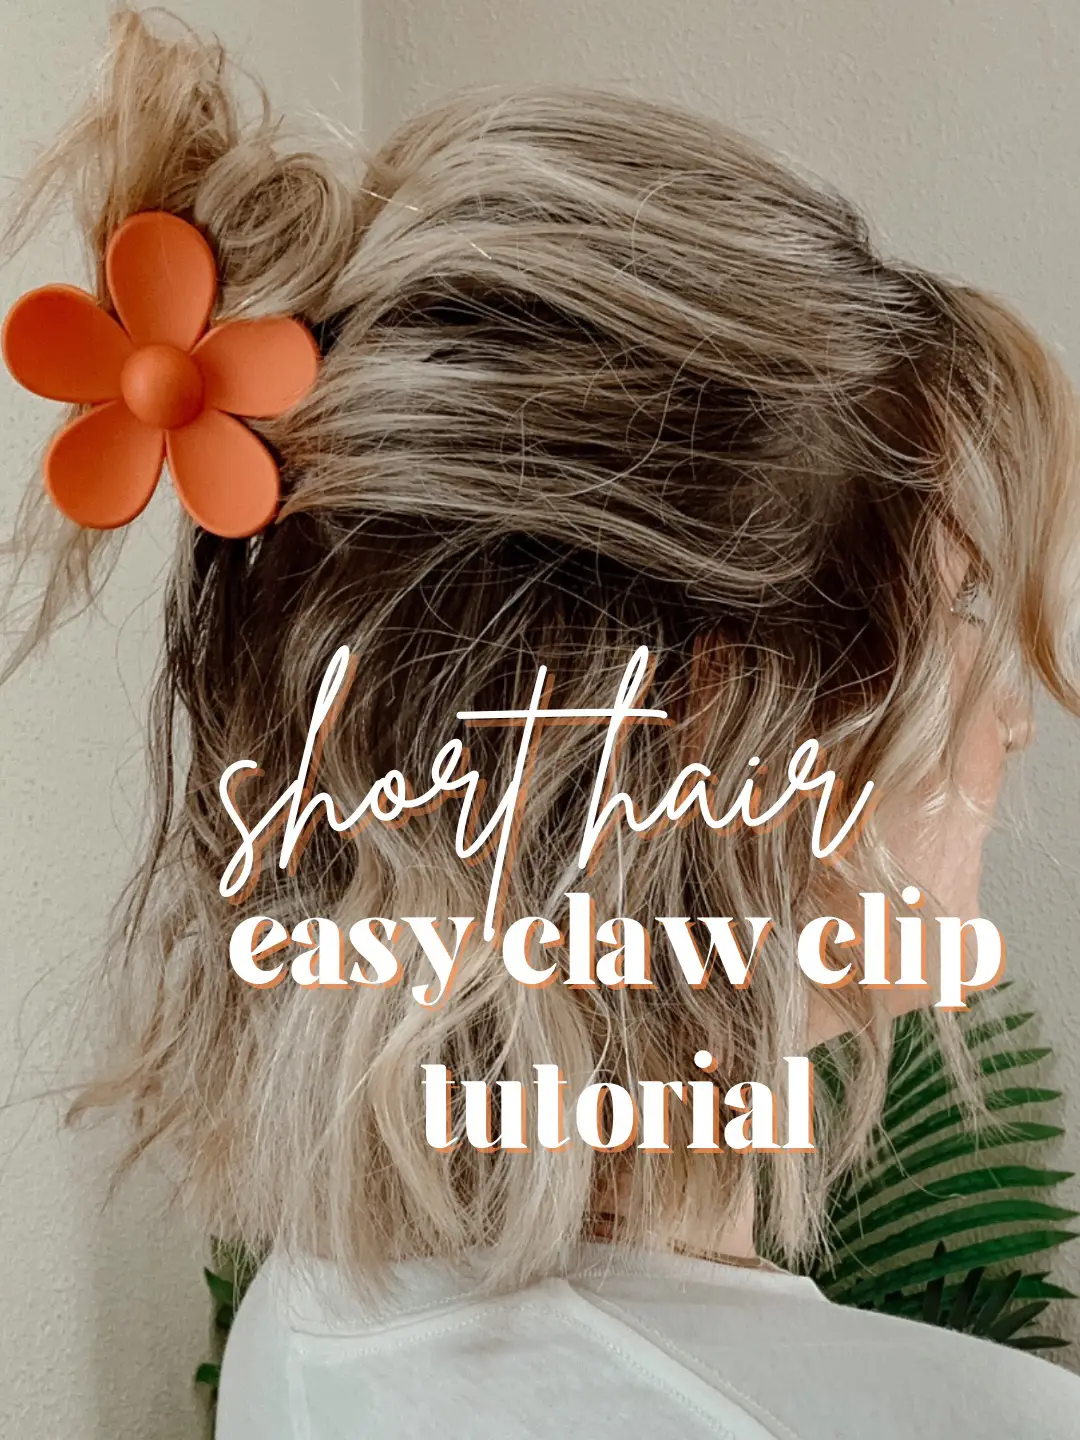 SHORT HAIR CLAW CLIP TUTORIAL 🌺, Video published by Theohiogirljaz